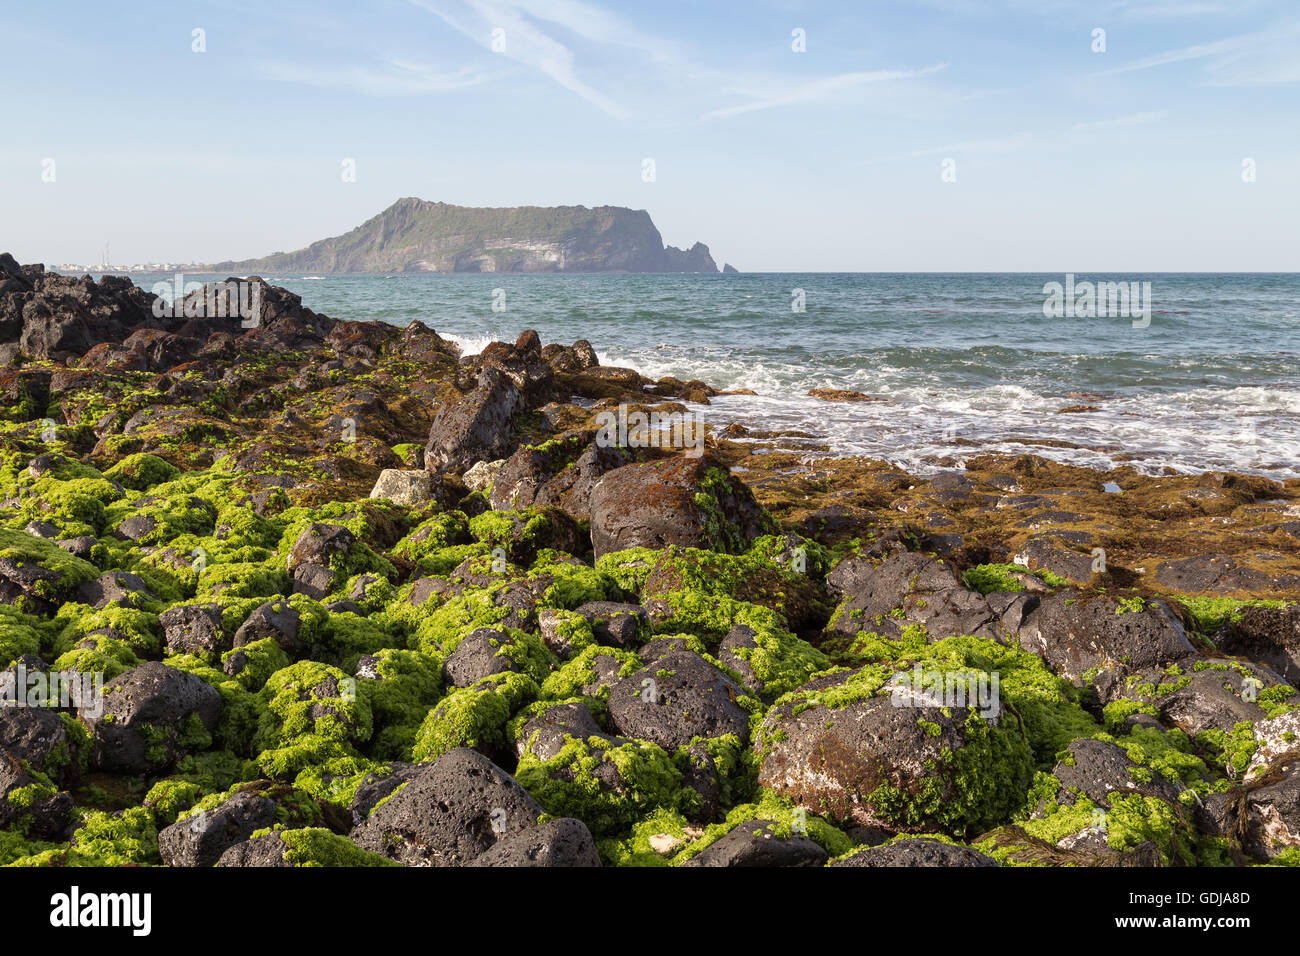 Black lava rocks covered with seaweed at Seopjikoji on Jeju Island in South Korea. Seongsan Ilchulbong is on the background. Stock Photo